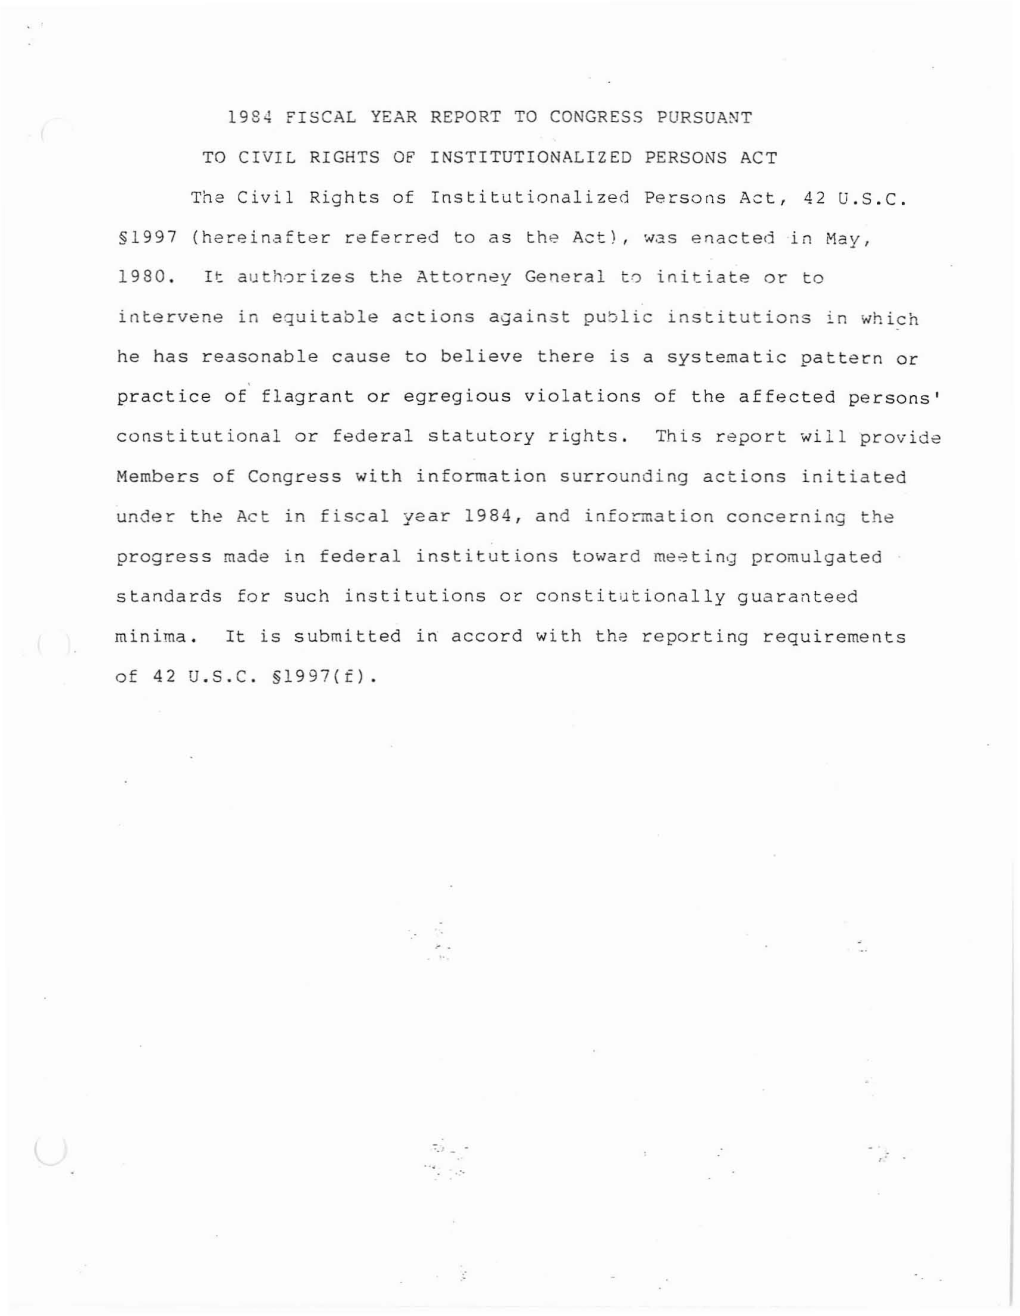 1984 Fiscal Year Report to Congress Pursuant to Civil Rights Of